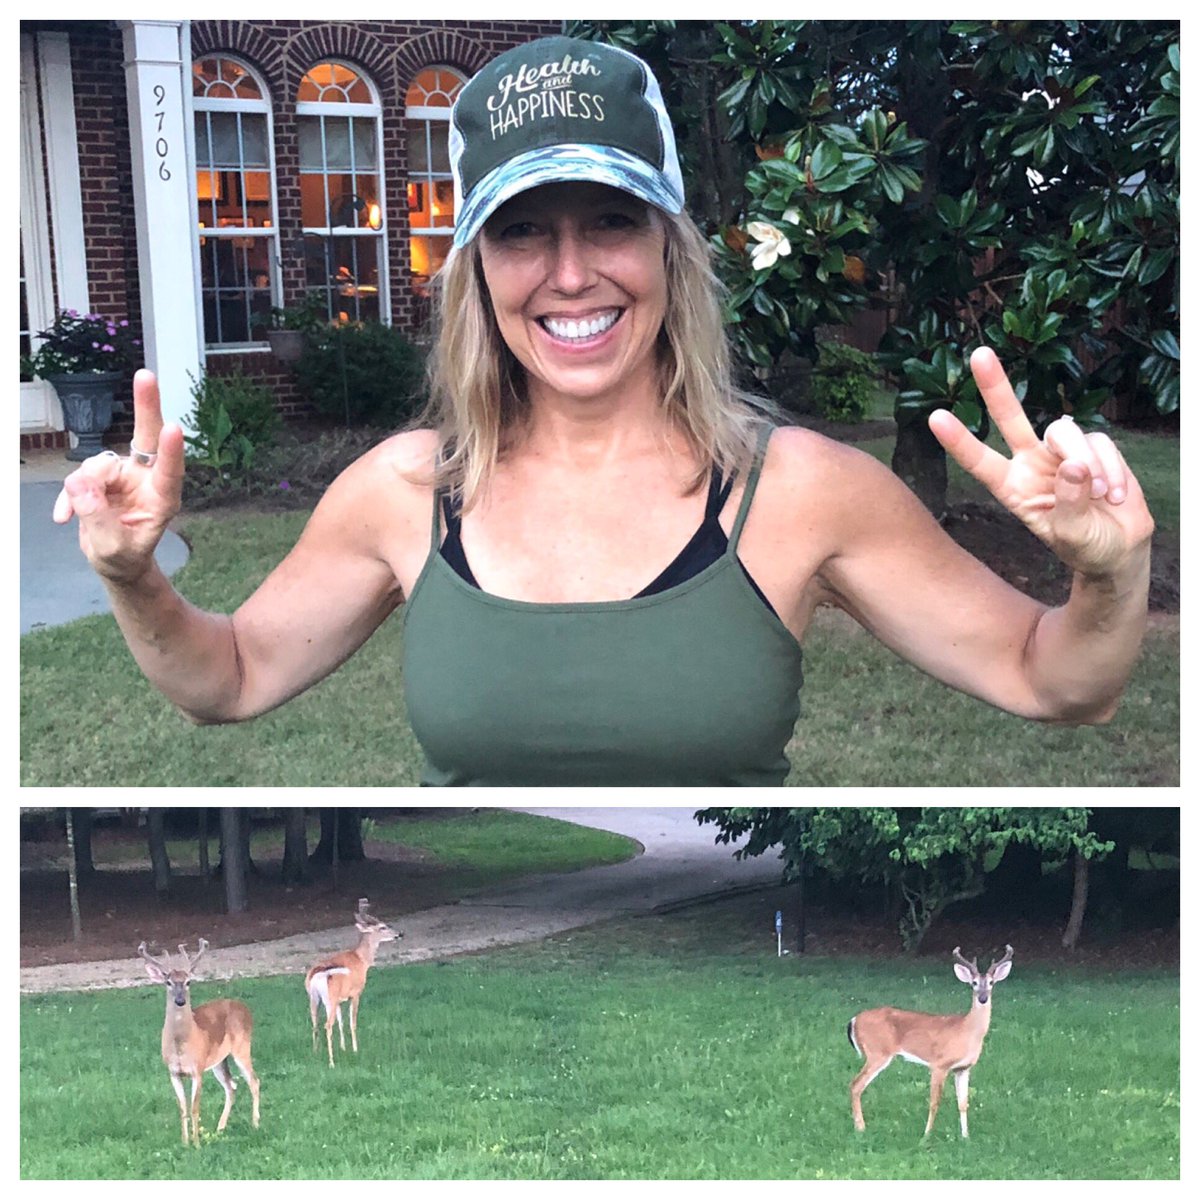 The deer saw my camo hat and got a little nervous but I assured them that all I was interested in is getting their guts healthy 😆 #lifechanging #feelyourbest #guthealthiseverything #ohdeer #camo #momsincamo #plexusworldwide